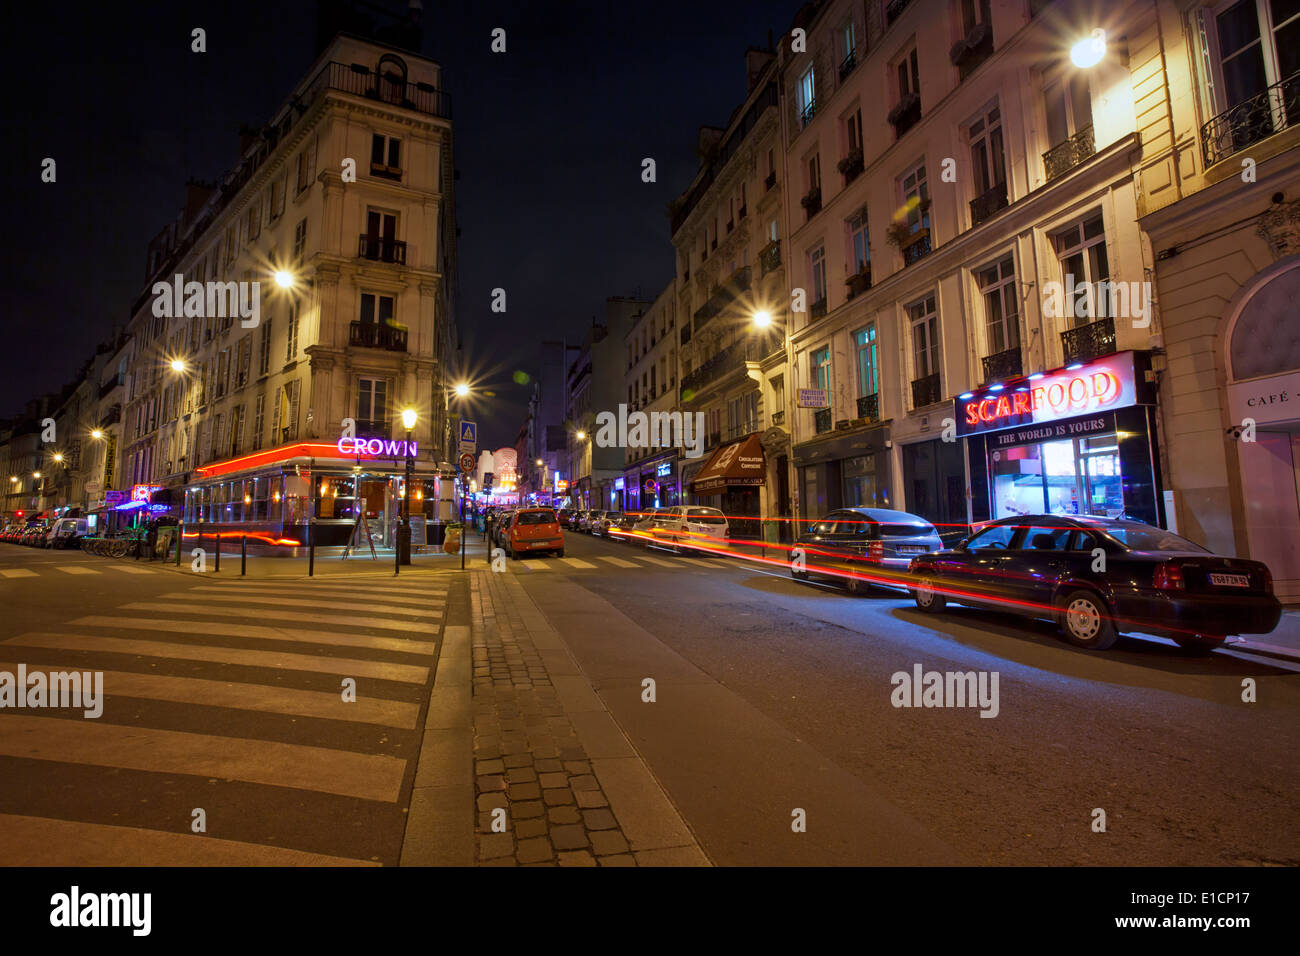 A quiet street scene at night in Paris, France Stock Photo